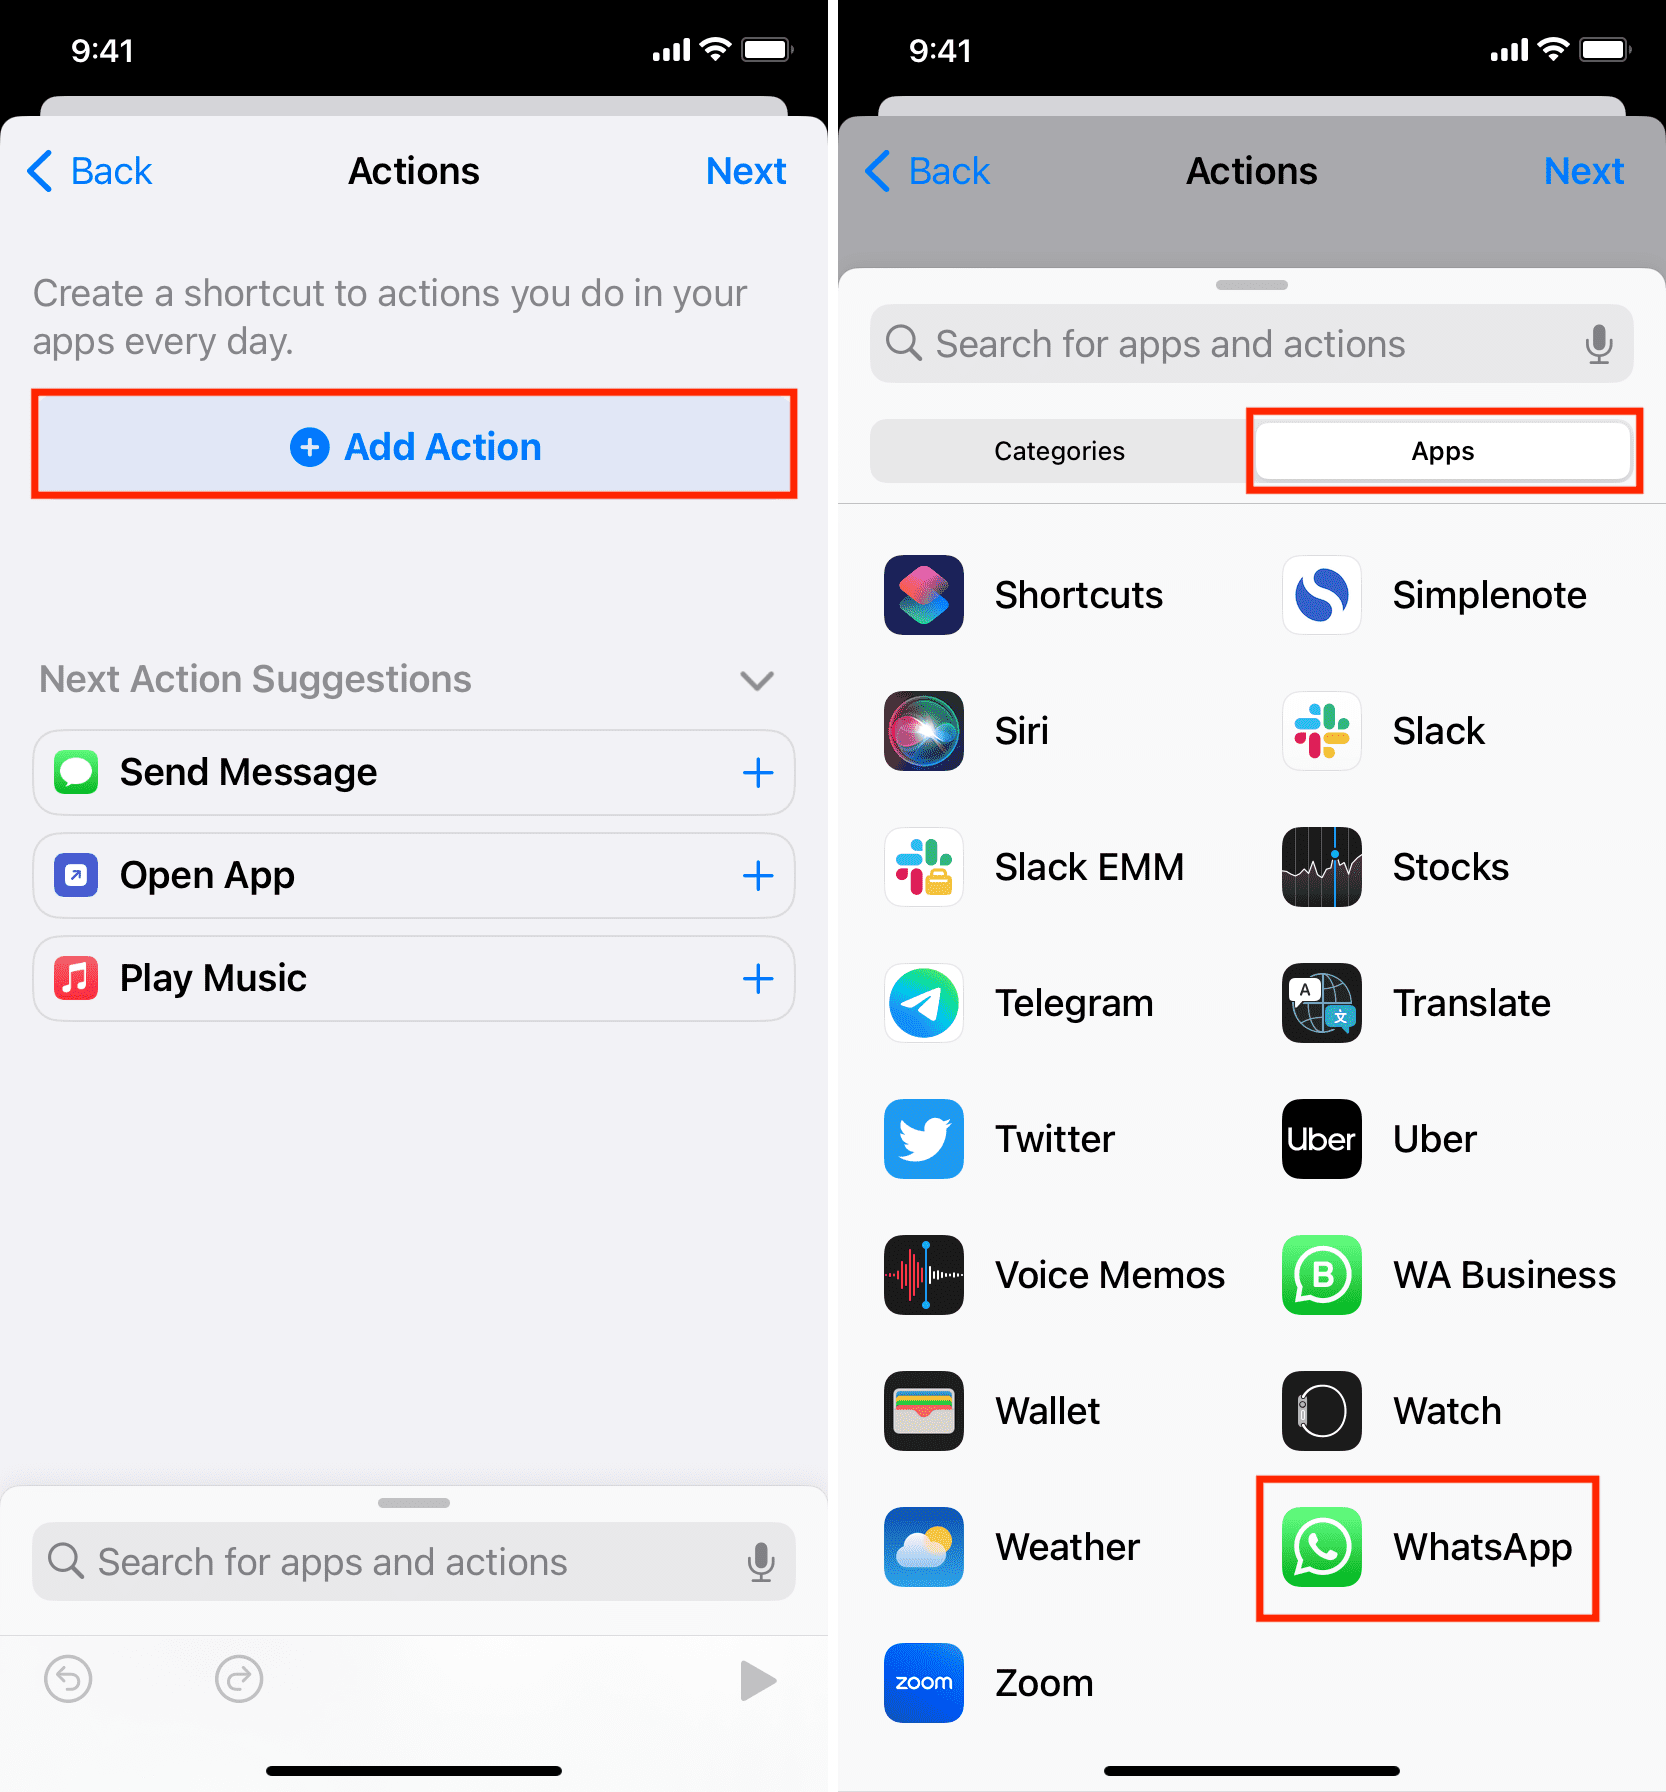 Tap Add Action and select WhatsApp from the apps section